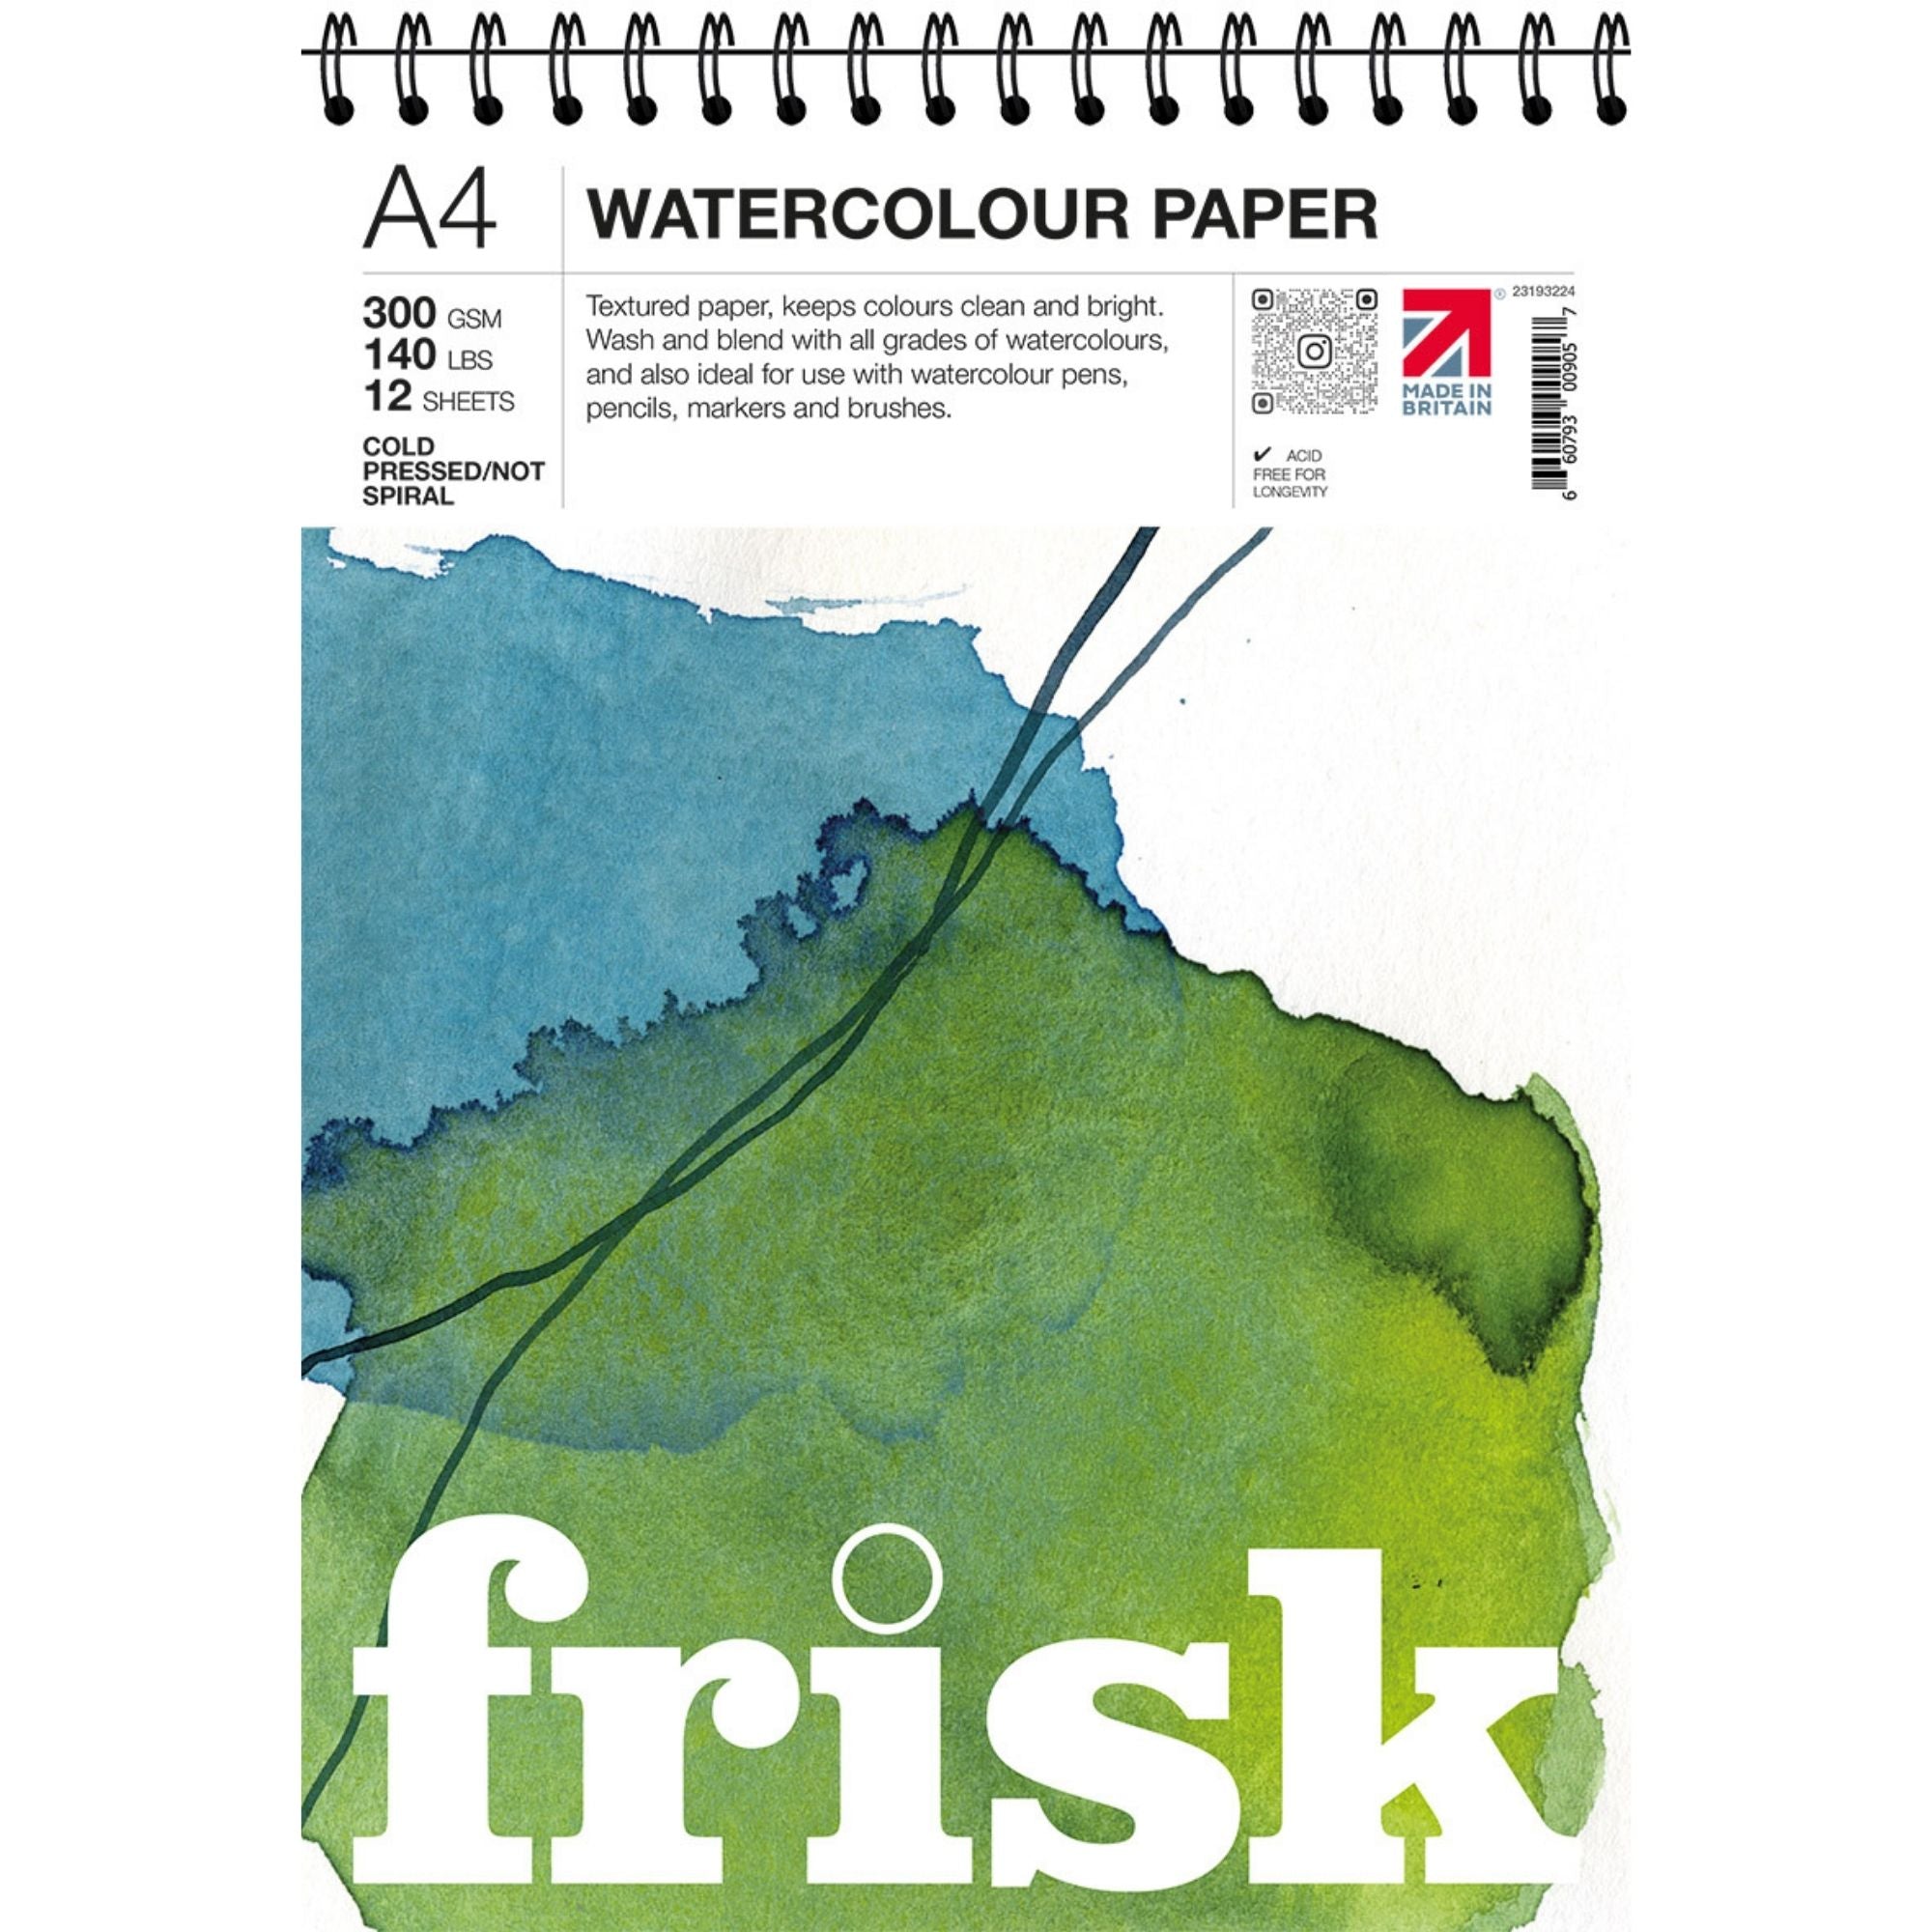 Frisk Watercolour Cold Pressed/Not Paper Spiral Pad - 300gsm - 12 Sheets